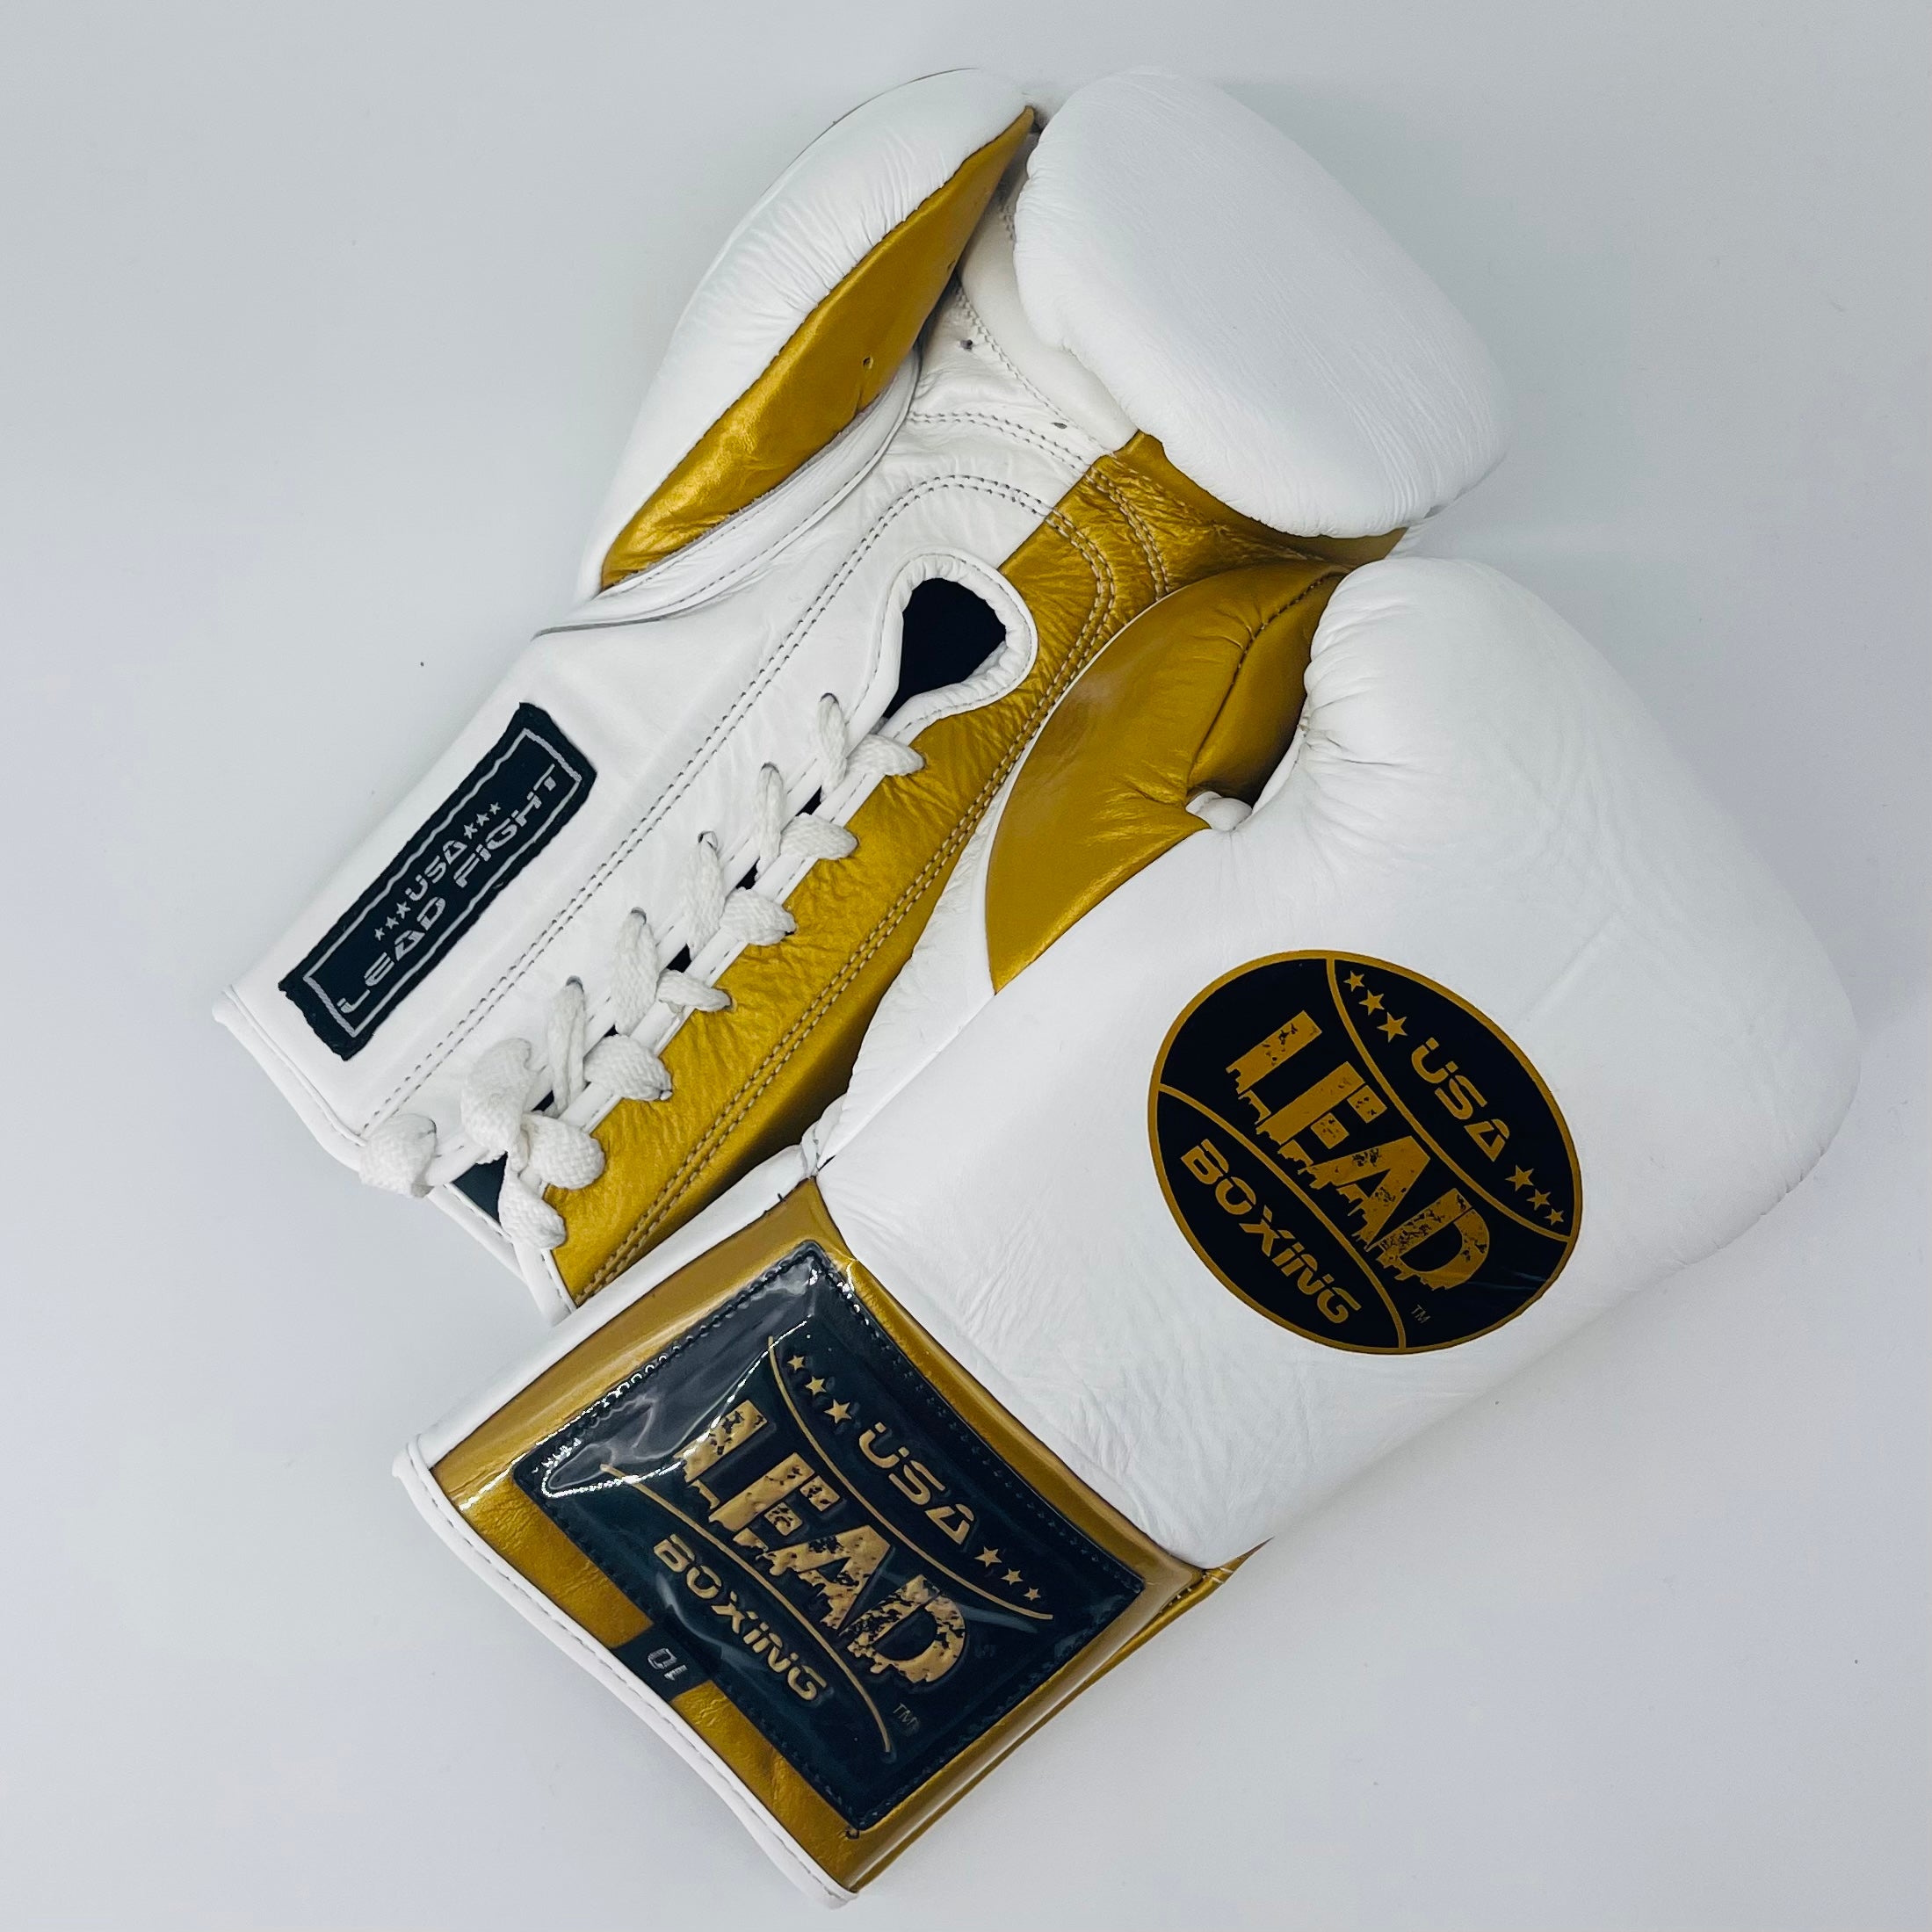 LEAD Boxing Fight Gloves (White /Gold)